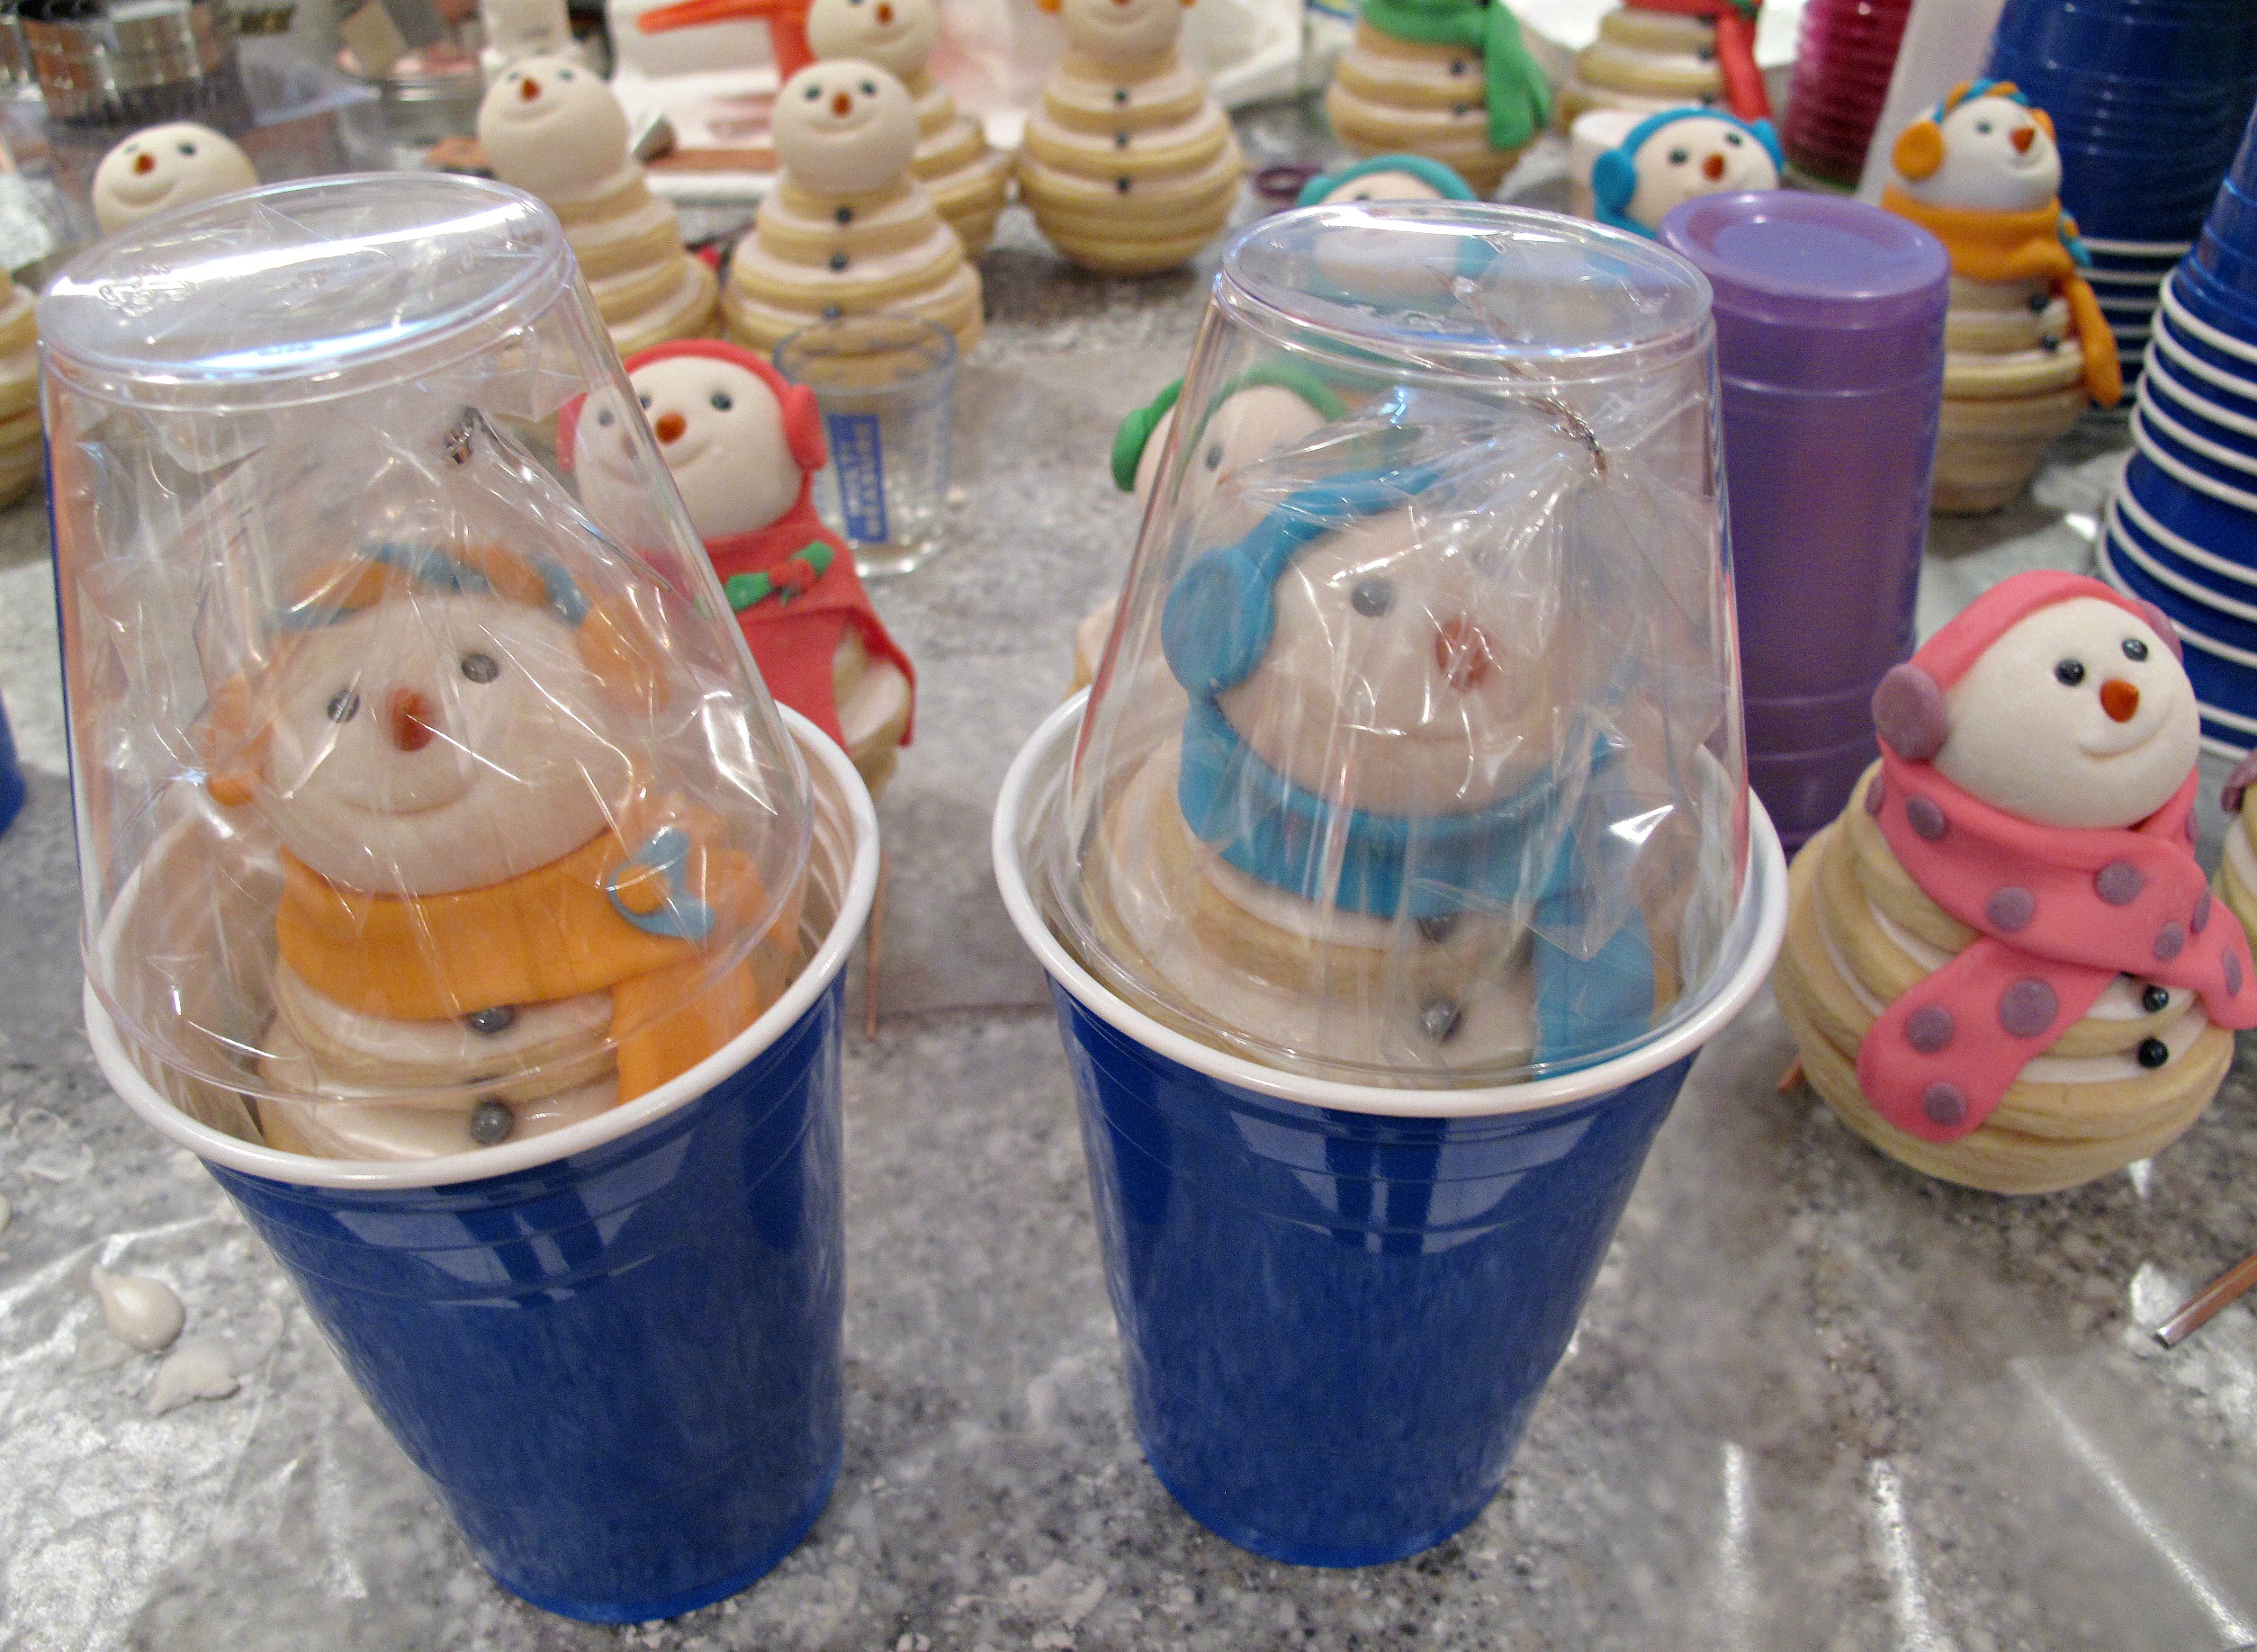  Snowmen Cookie Stacks packed in capsules made from two plastic drinking cups.